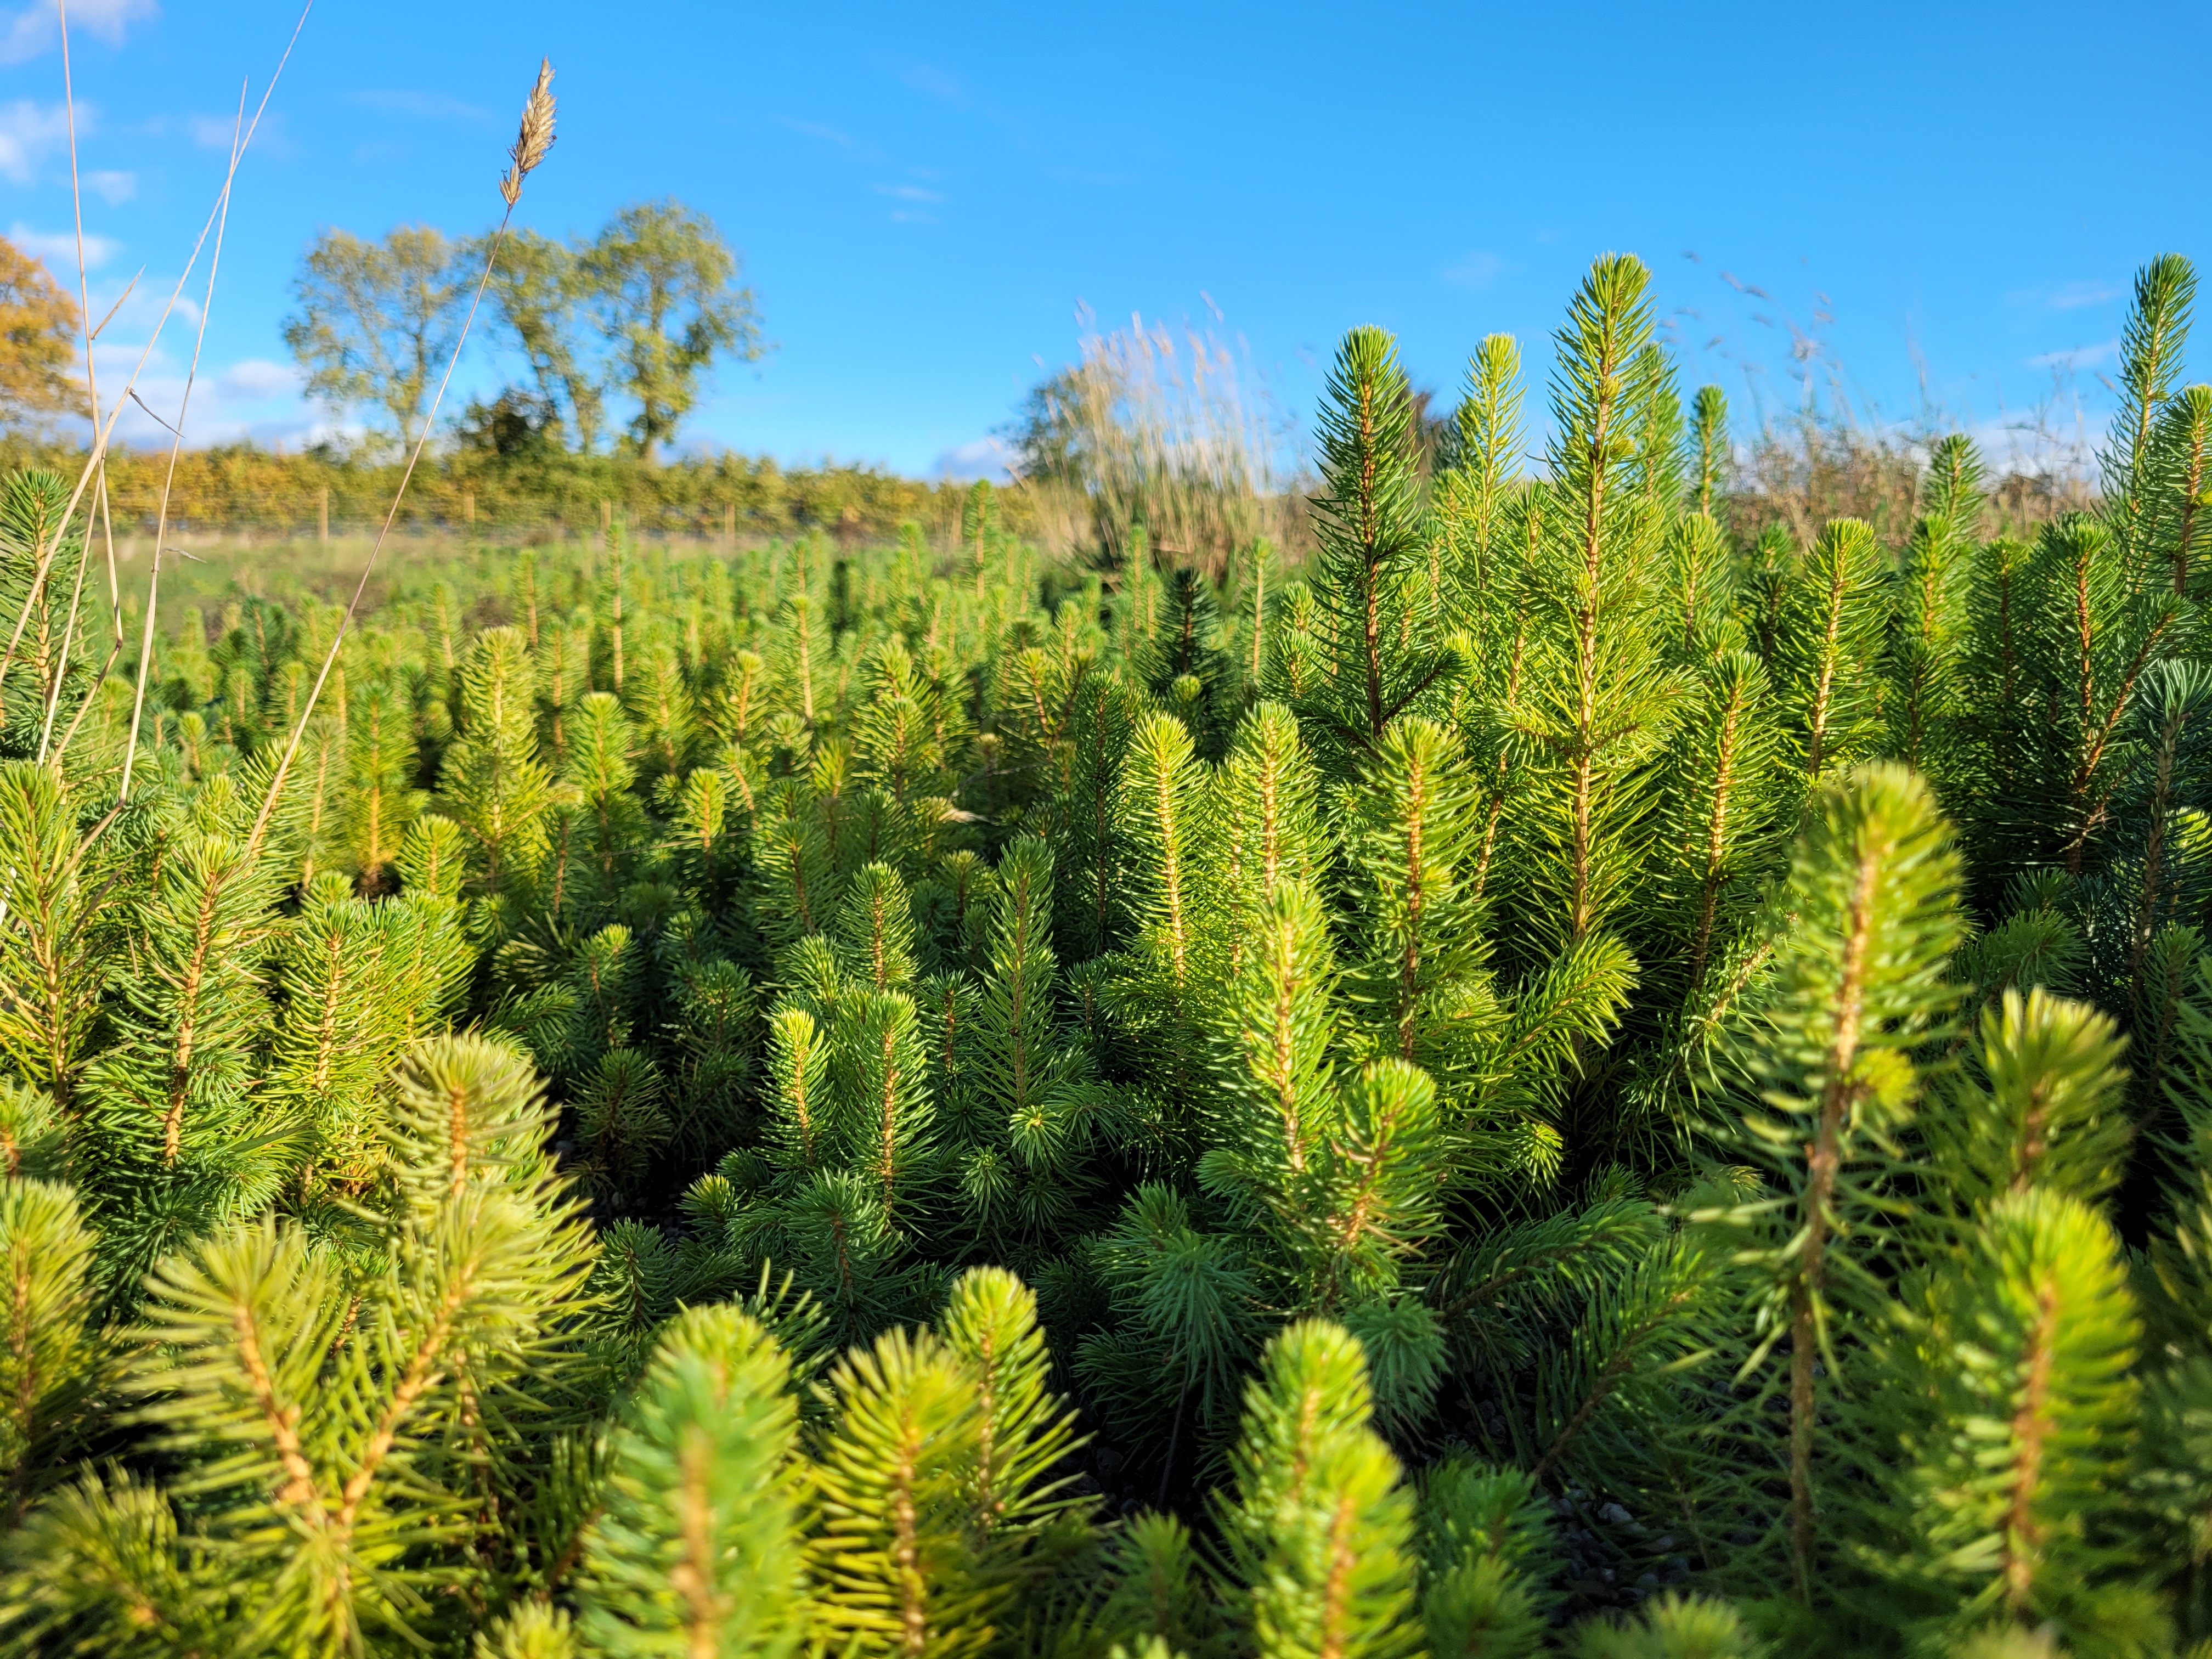 Young green conifer trees growing in wide rows under blue skies